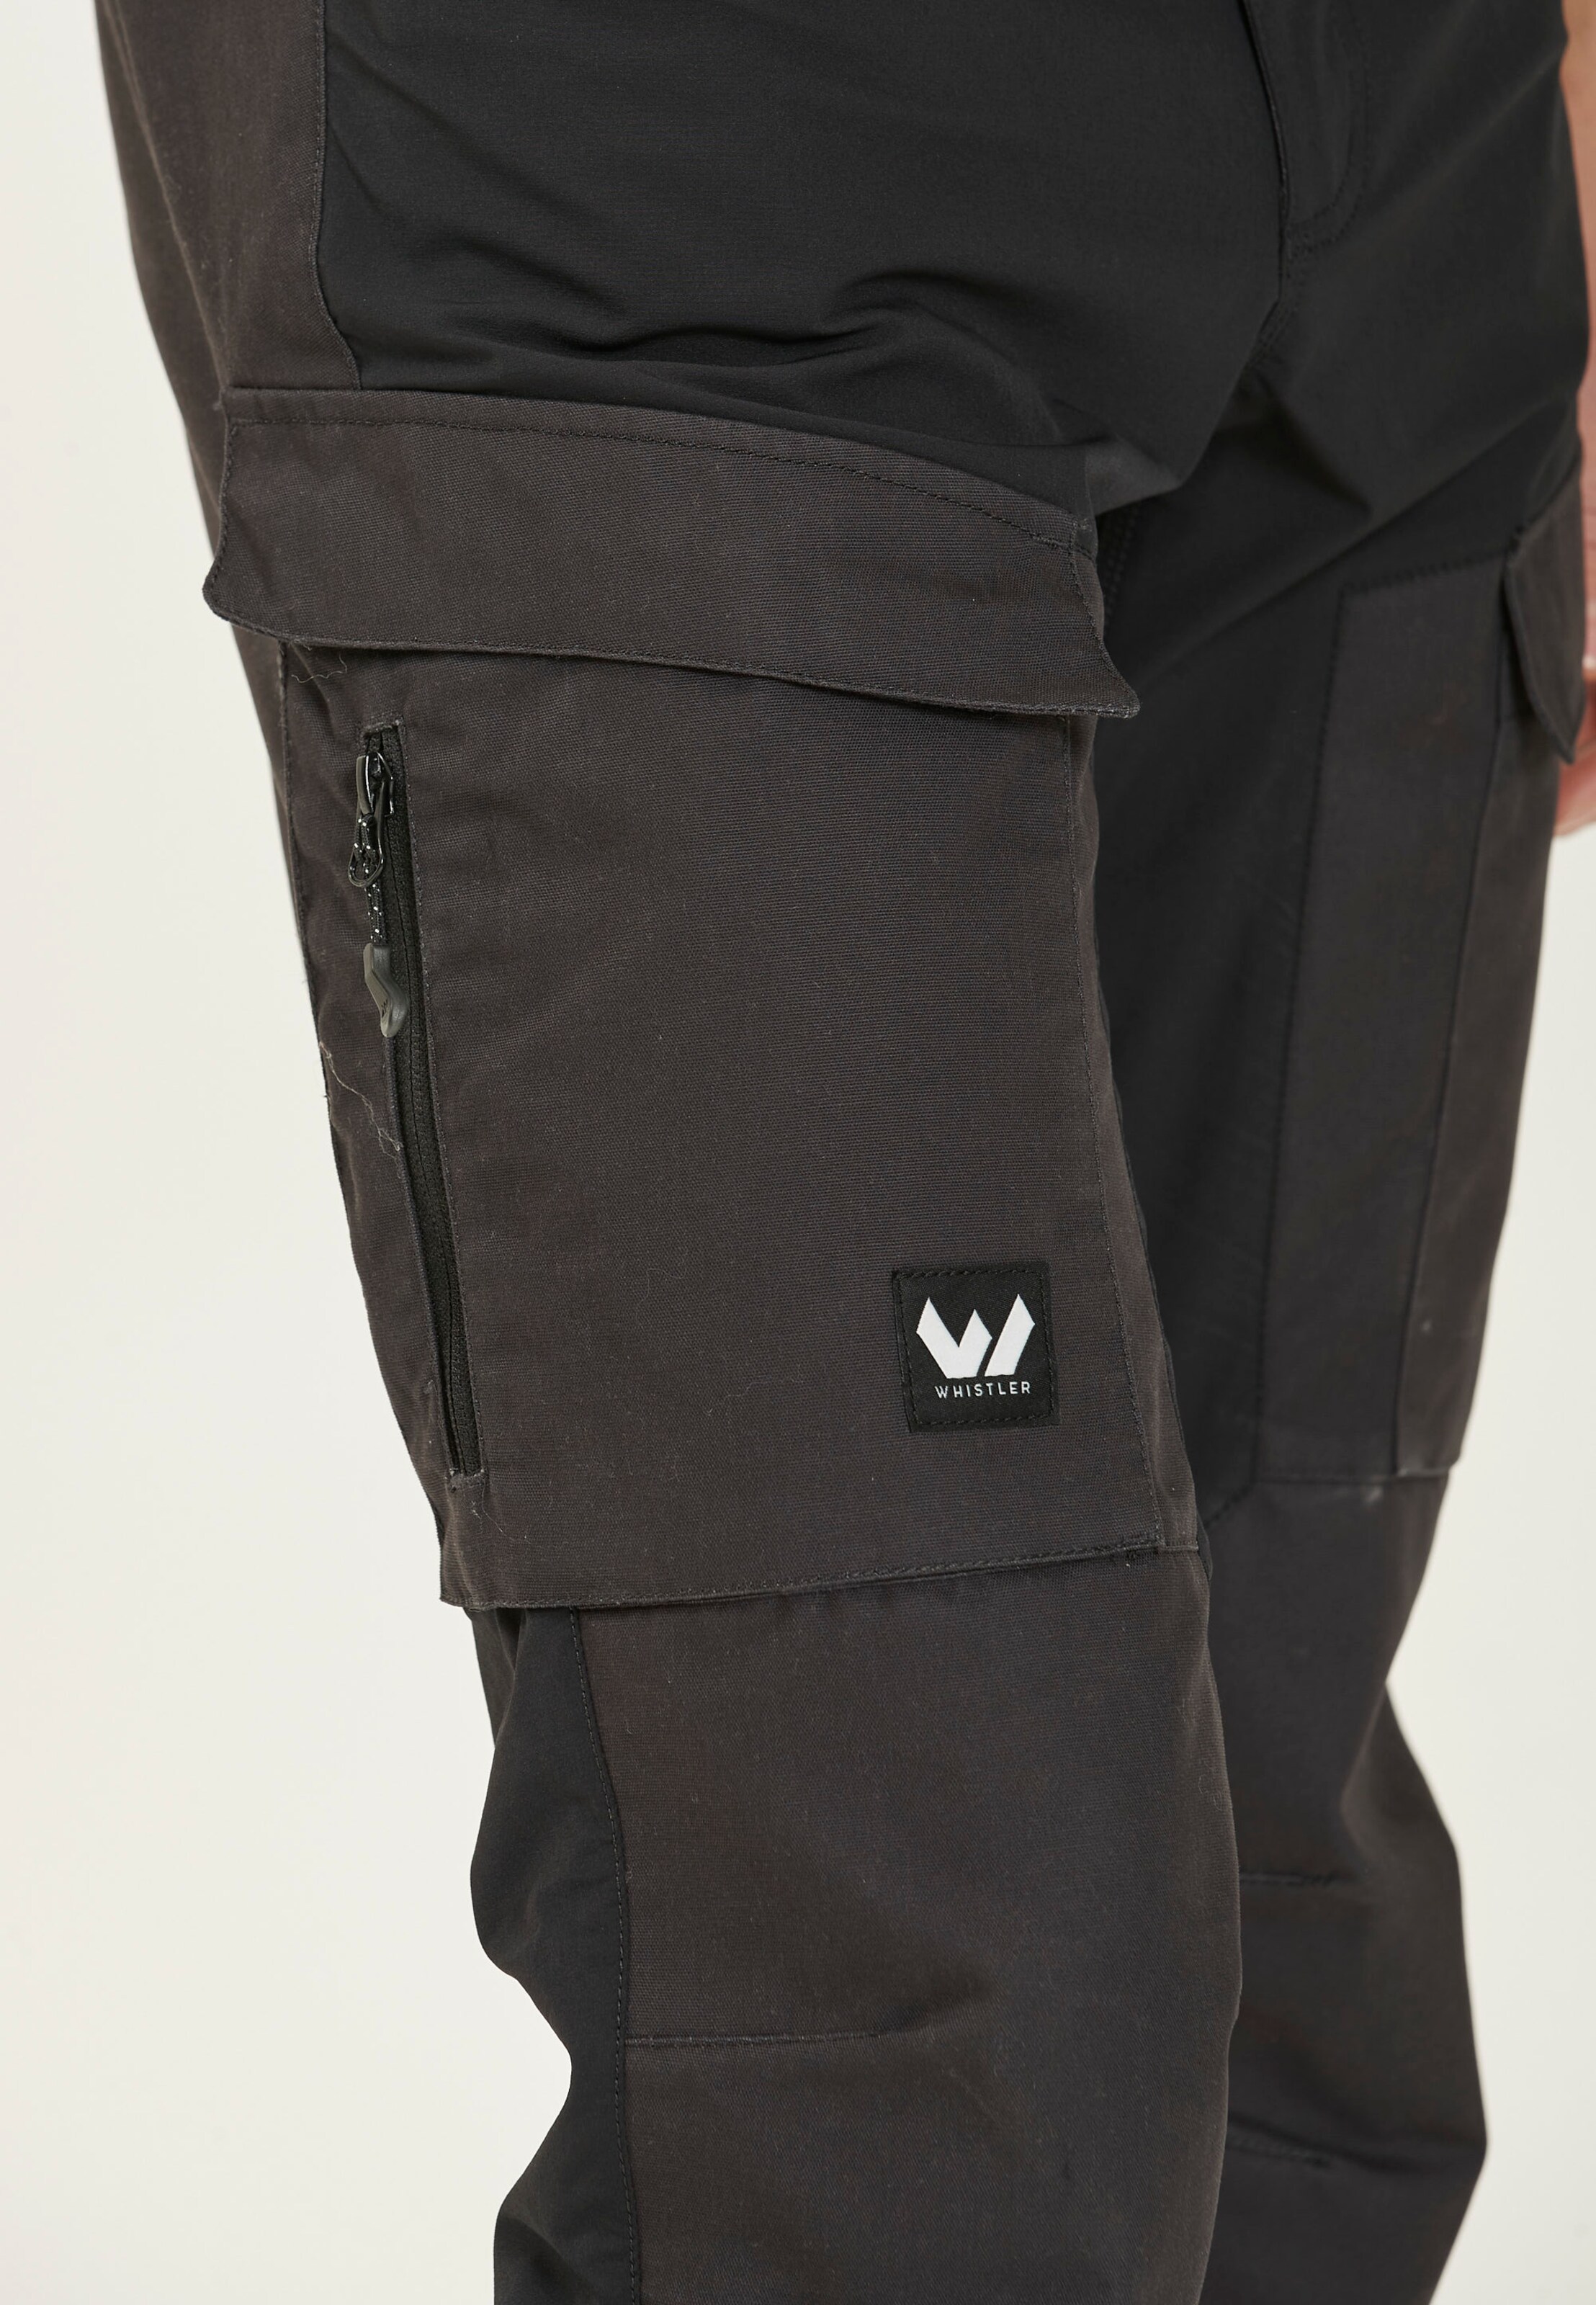 | Whistler Regular ABOUT Outdoor Anthracite Pants in YOU \'ROMNING\'